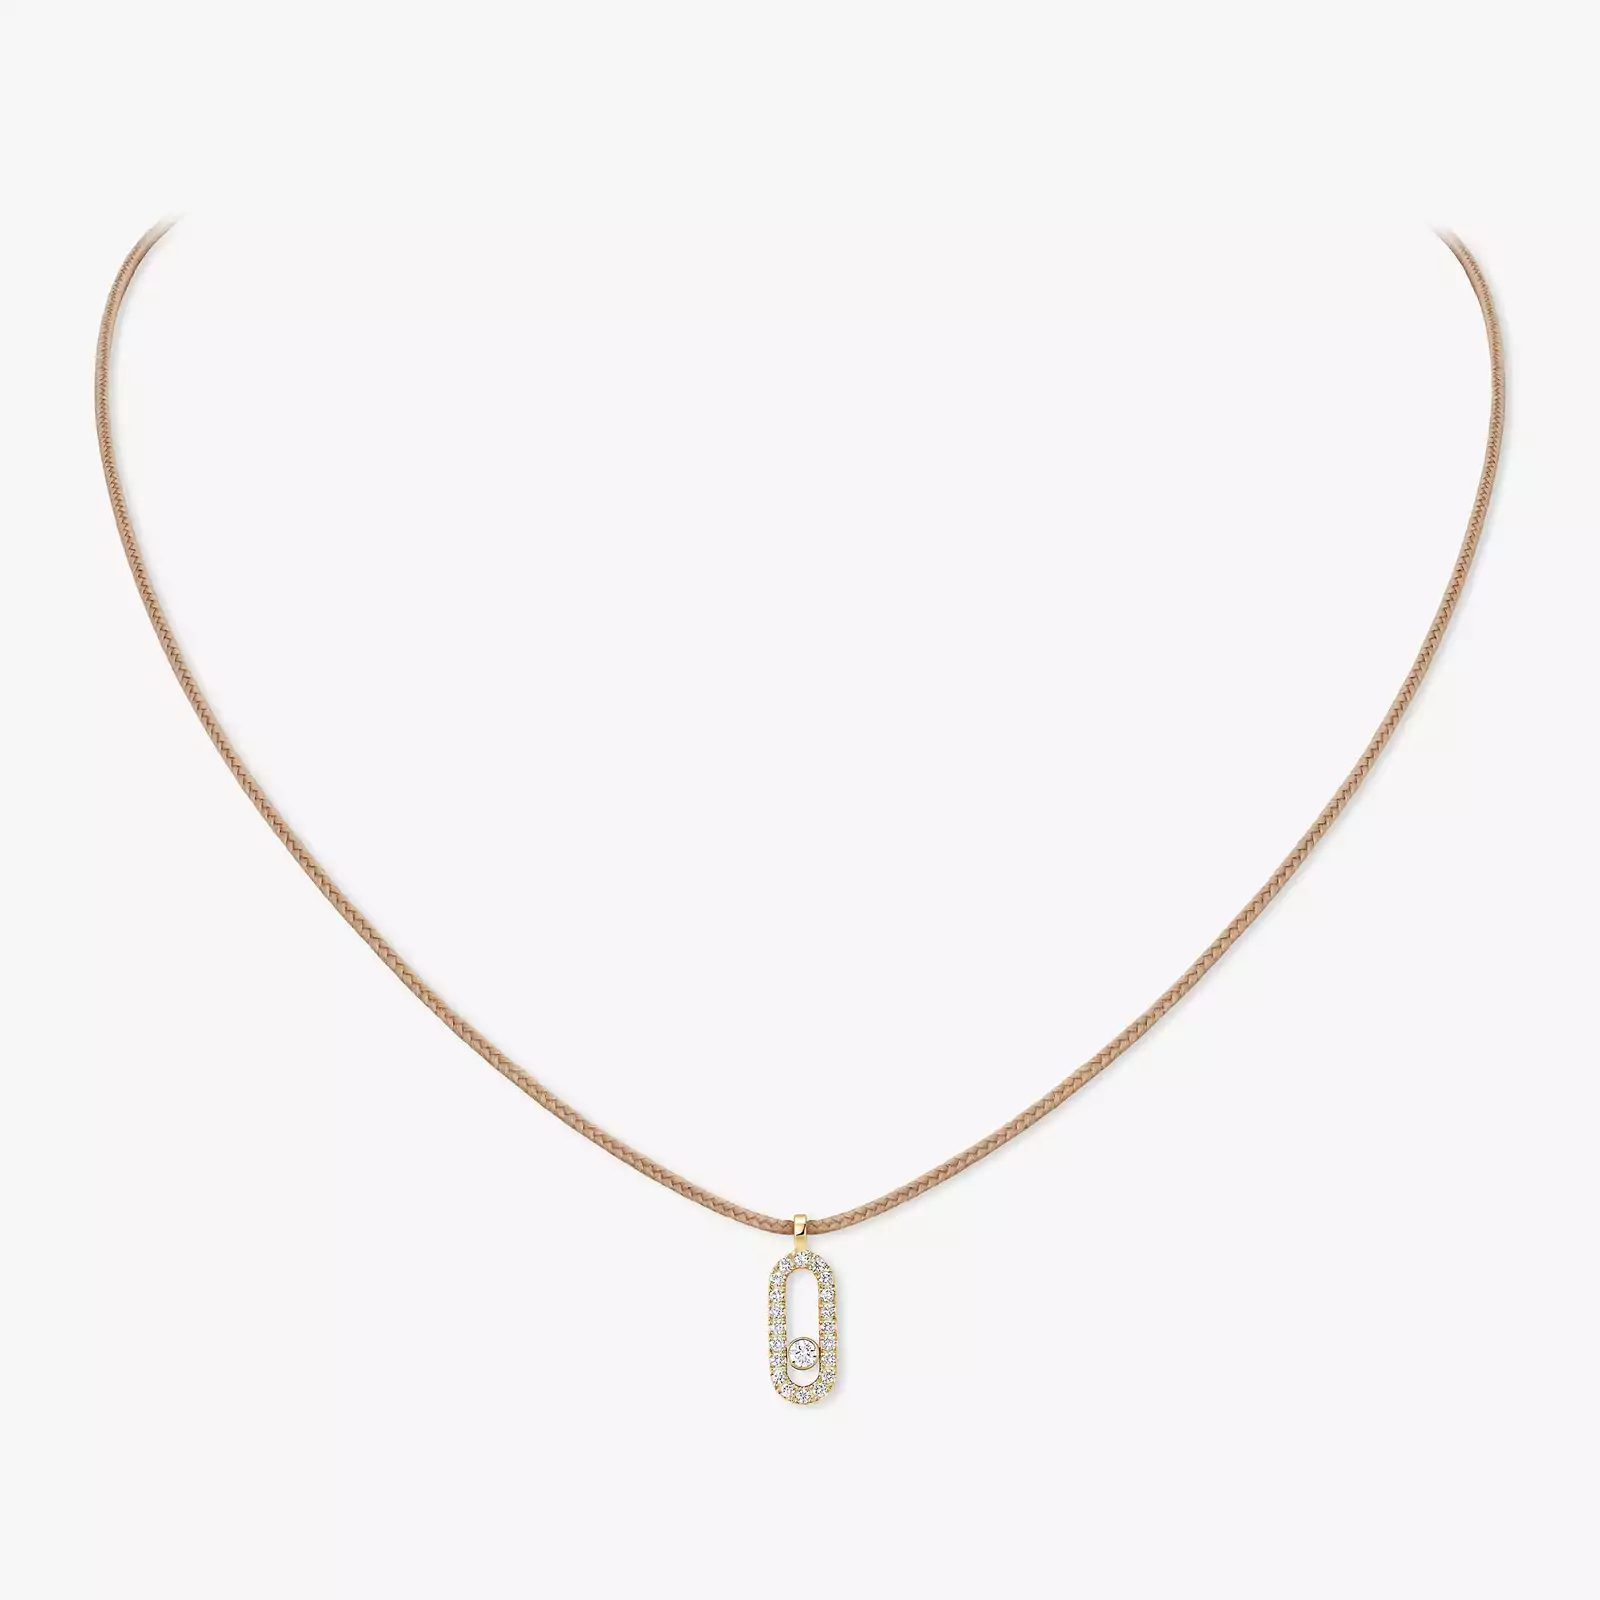 Necklace For Her Yellow Gold Diamond Messika CARE(S) Beige Cord Pavé Necklace 14105-YG